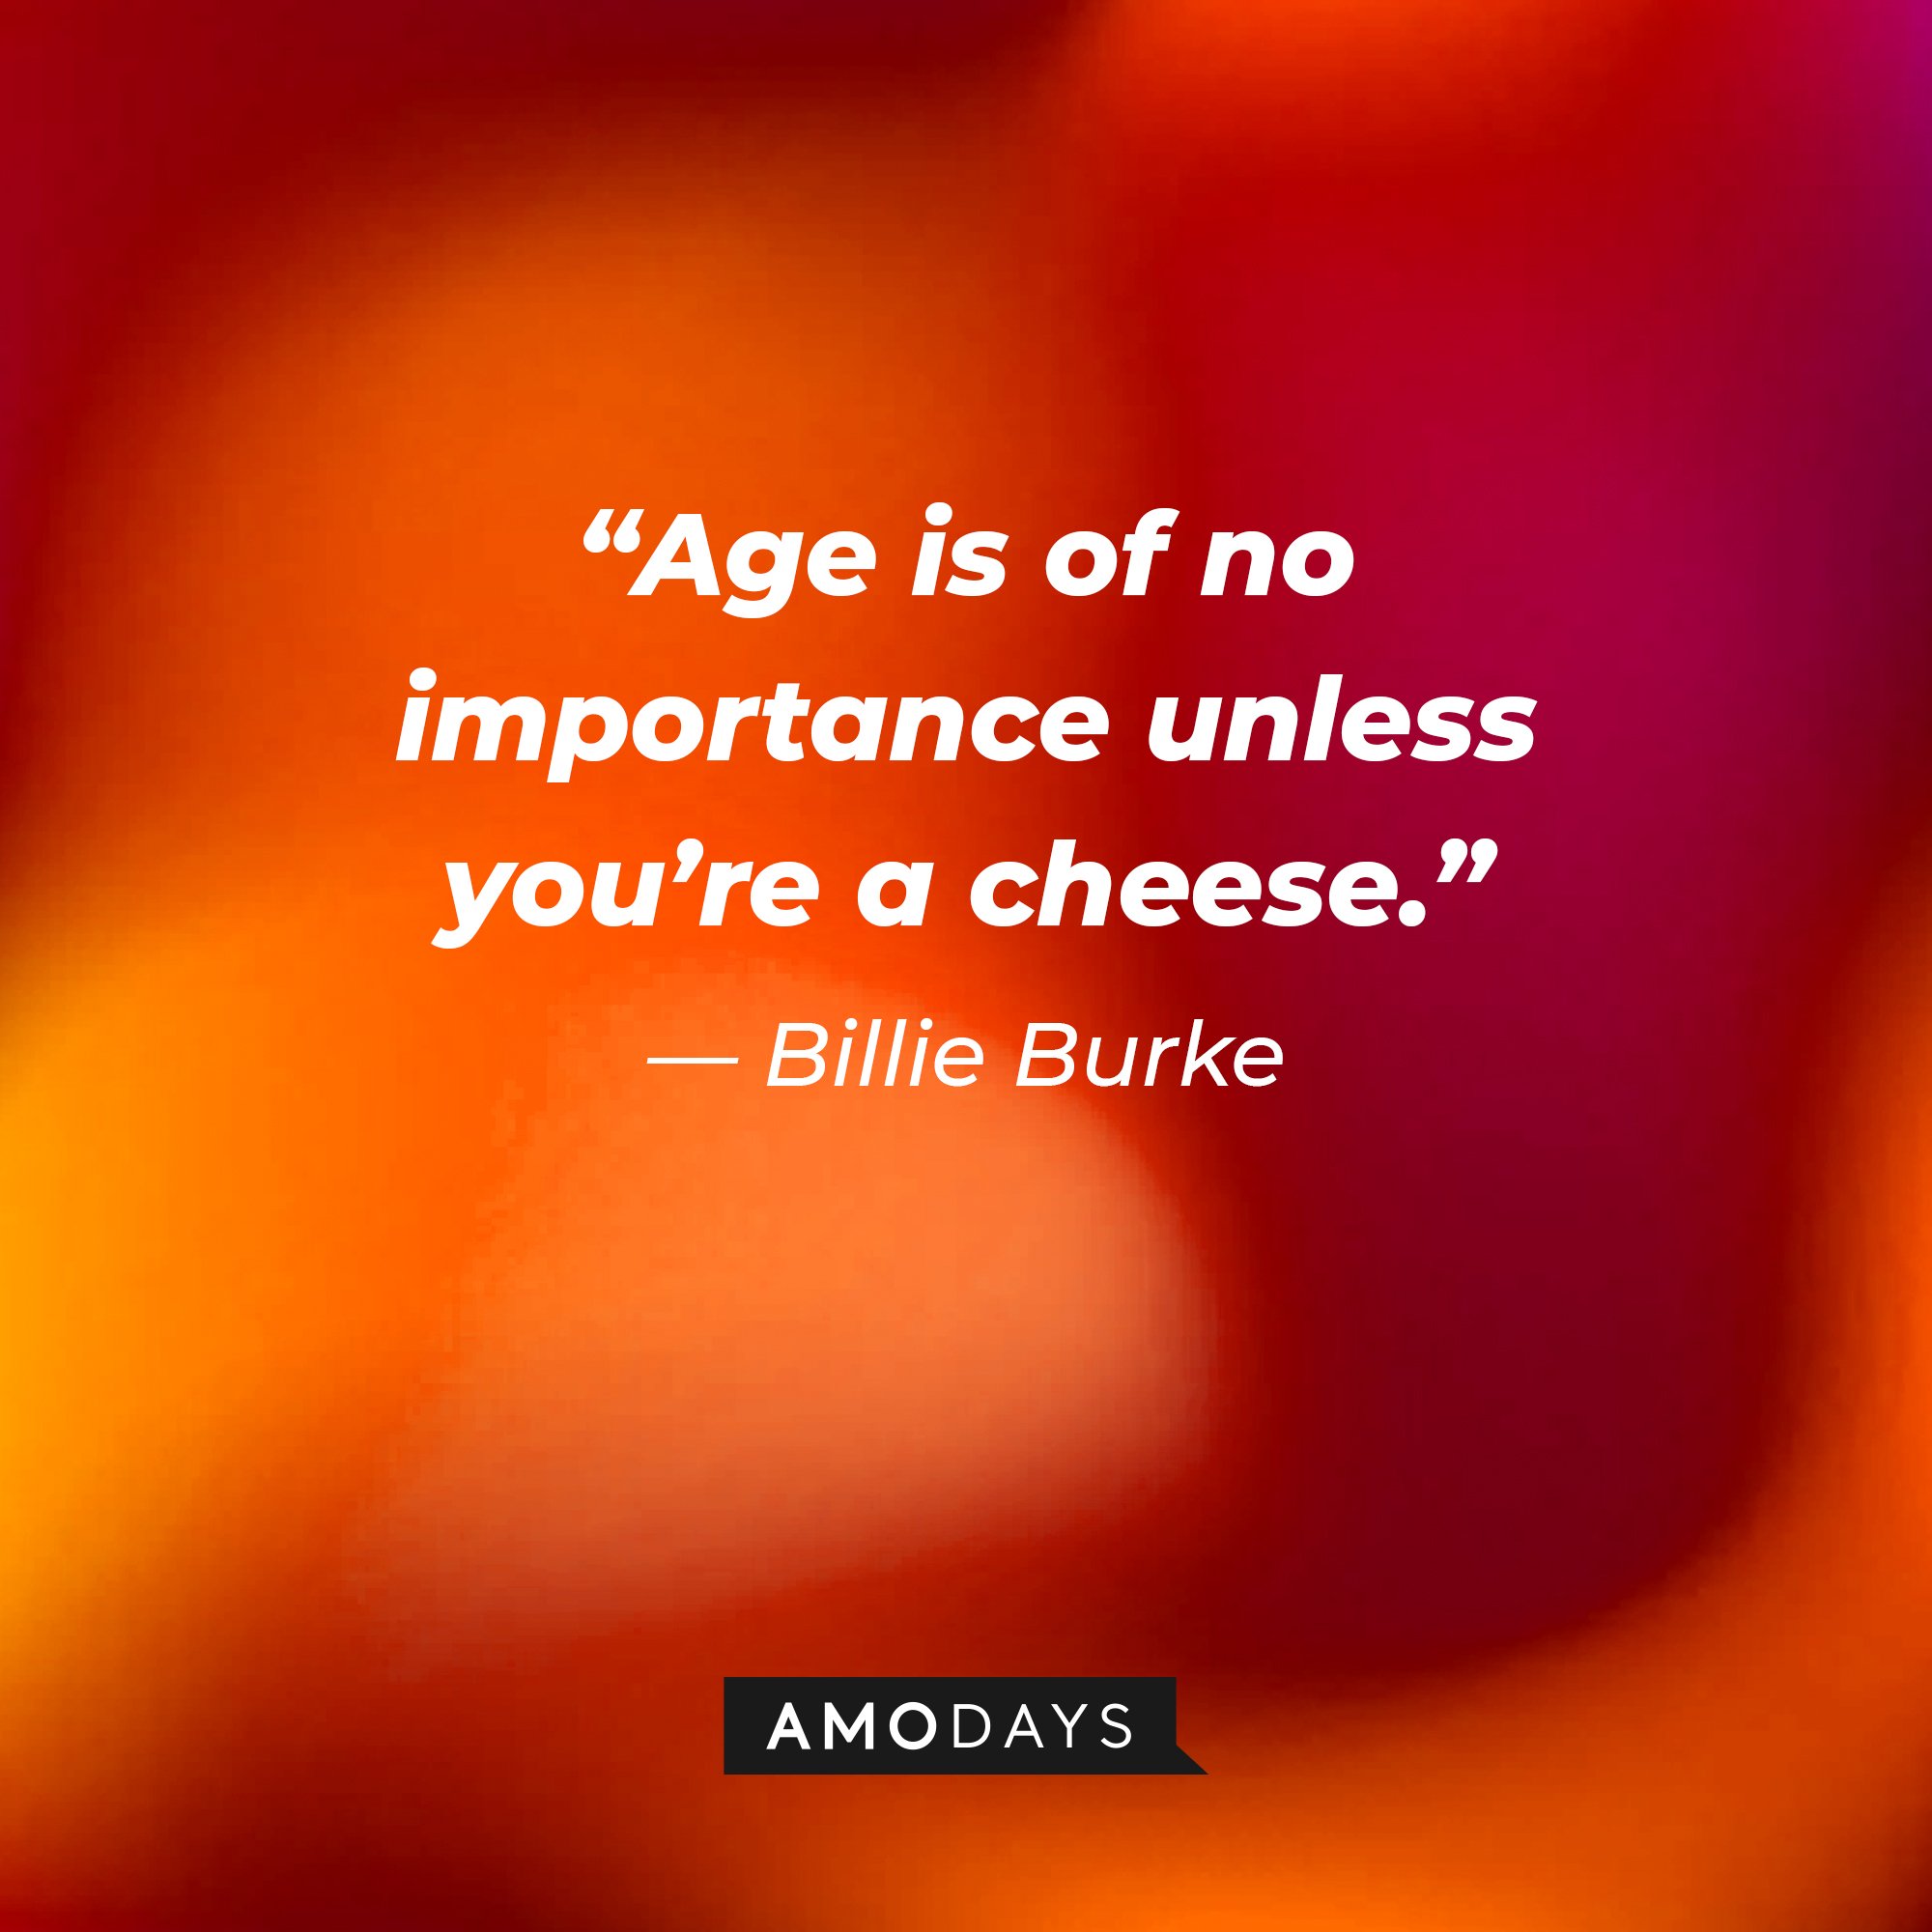 Billie Burke‘s quote: “Age is of no importance unless you’re a cheese.” | Image: AmoDays